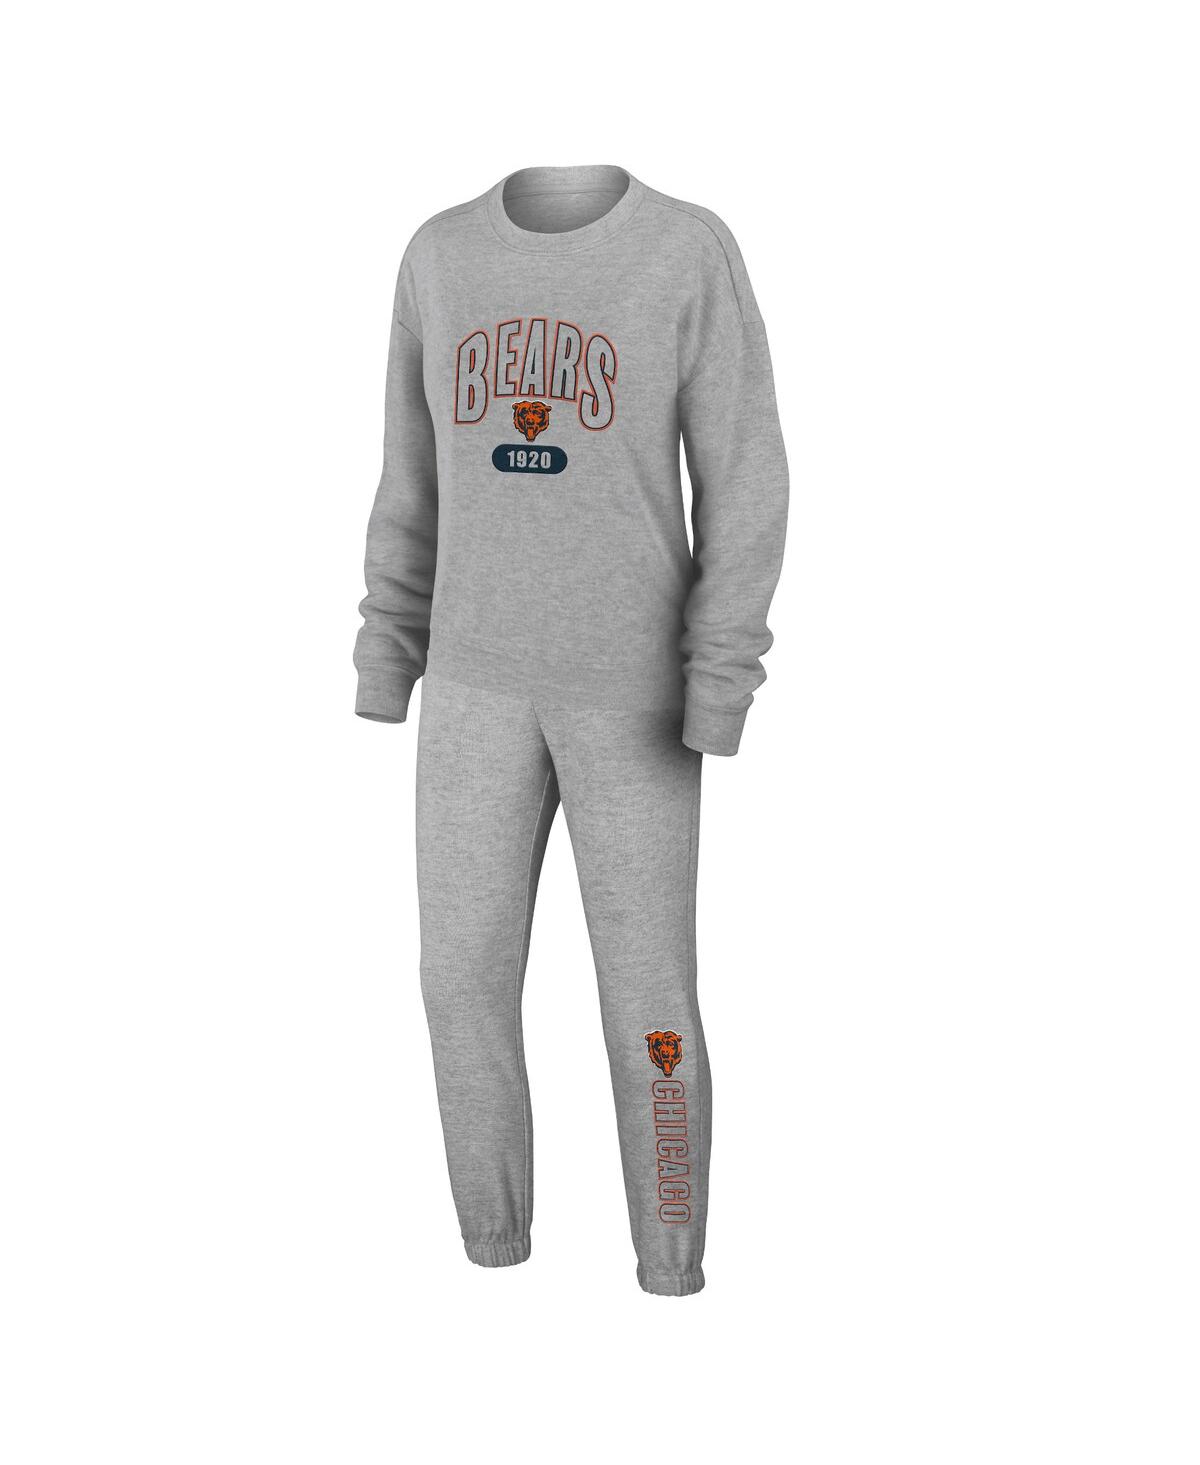 Women's Wear by Erin Andrews Heather Gray Chicago Bears Knit Long Sleeve Tri-Blend T-shirt and Pants Sleep Set - Heather Gray